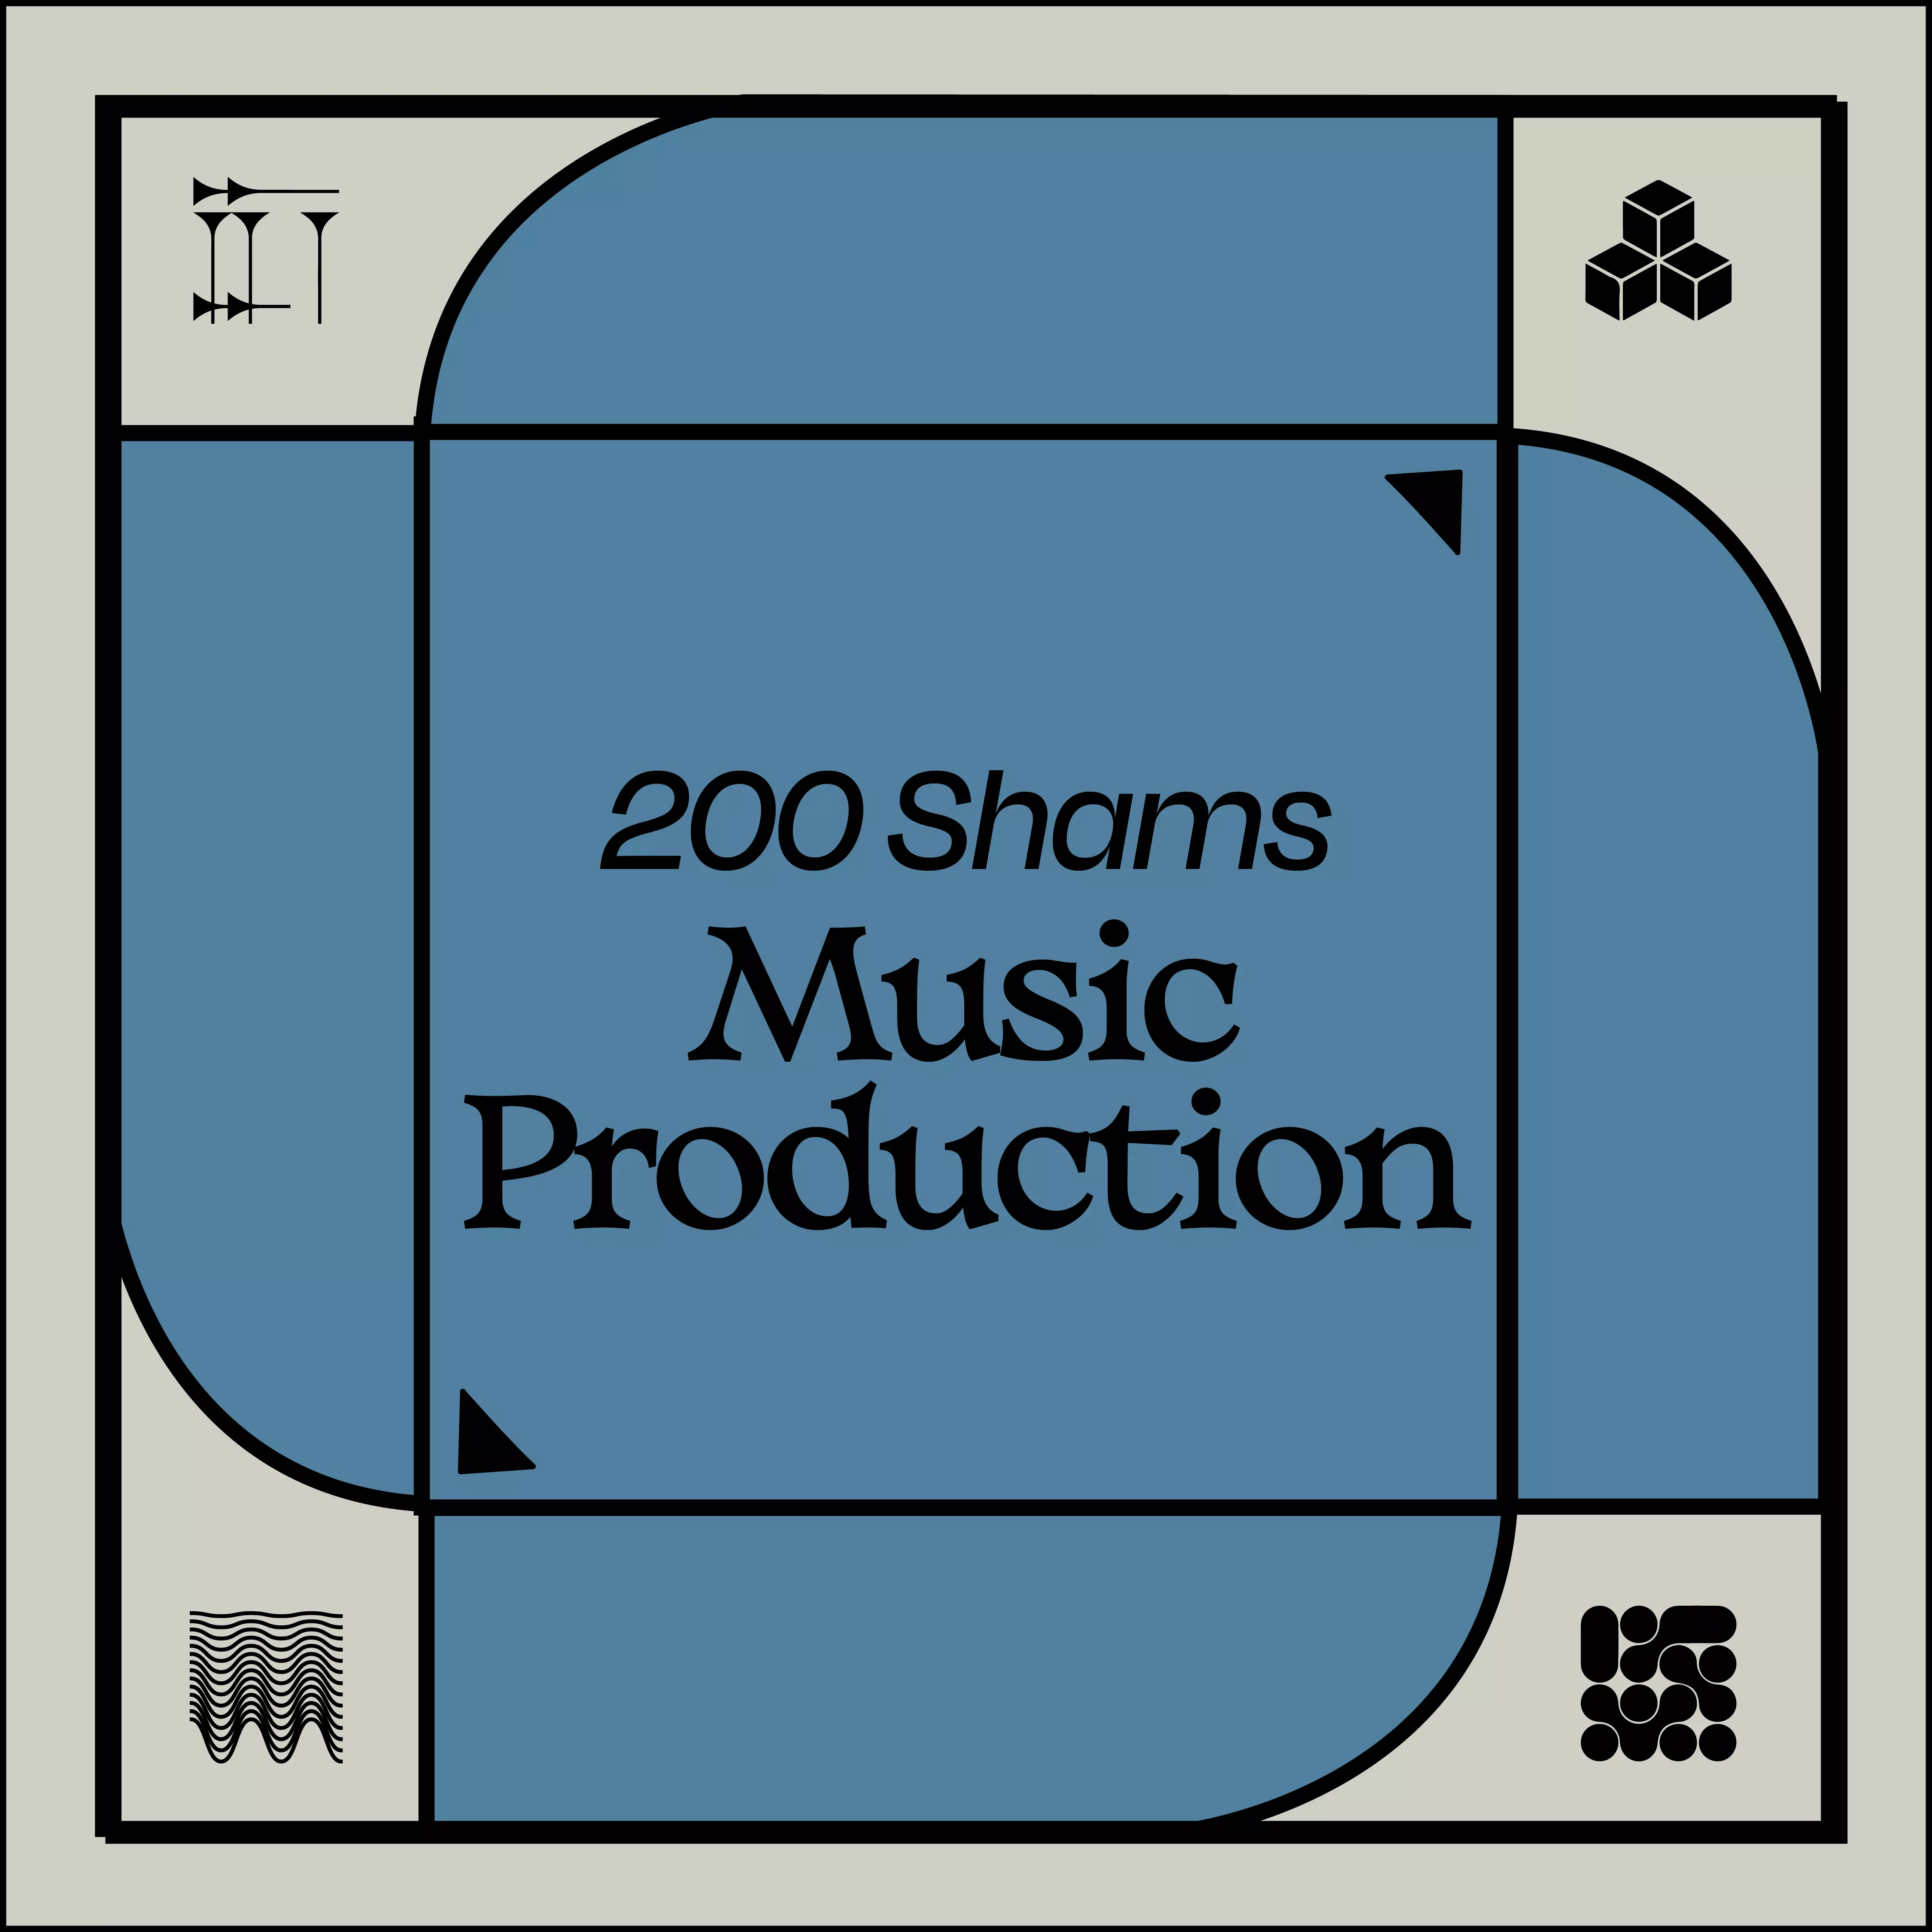 <p>Music Production  with 200 Shams</p>